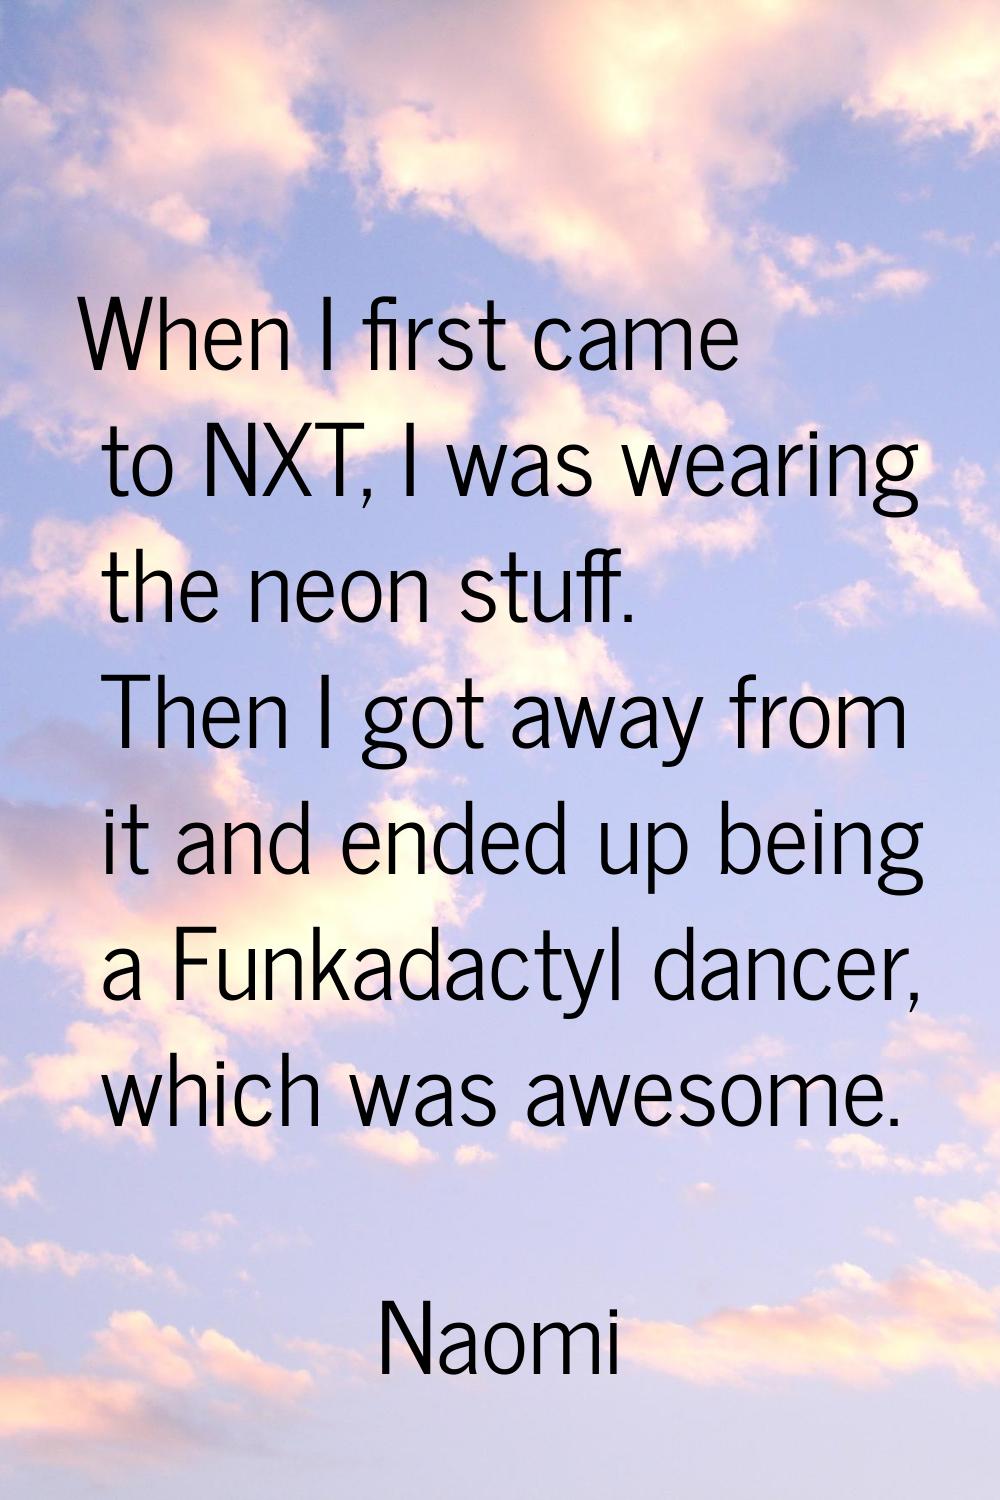 When I first came to NXT, I was wearing the neon stuff. Then I got away from it and ended up being 